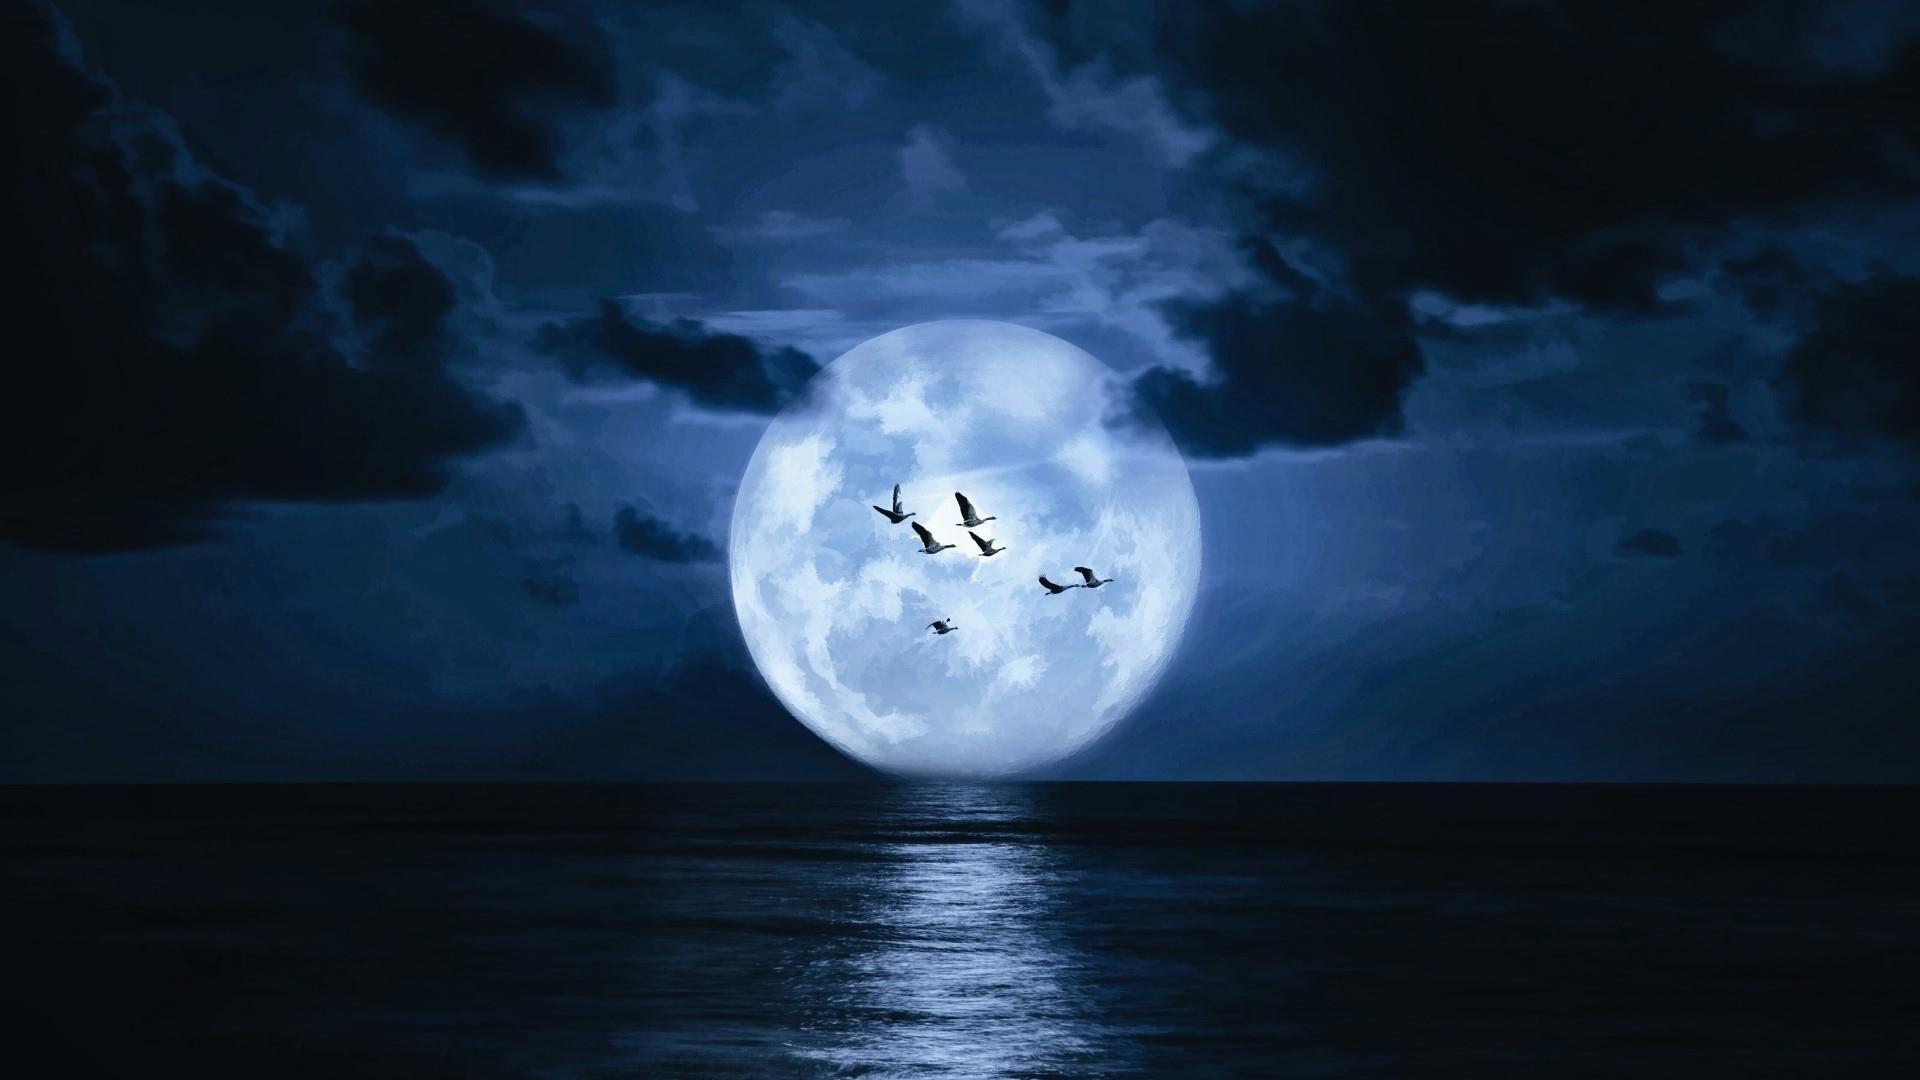 Supermoon On The Night Sky Above The Sea Wallpaper. Wallpaper